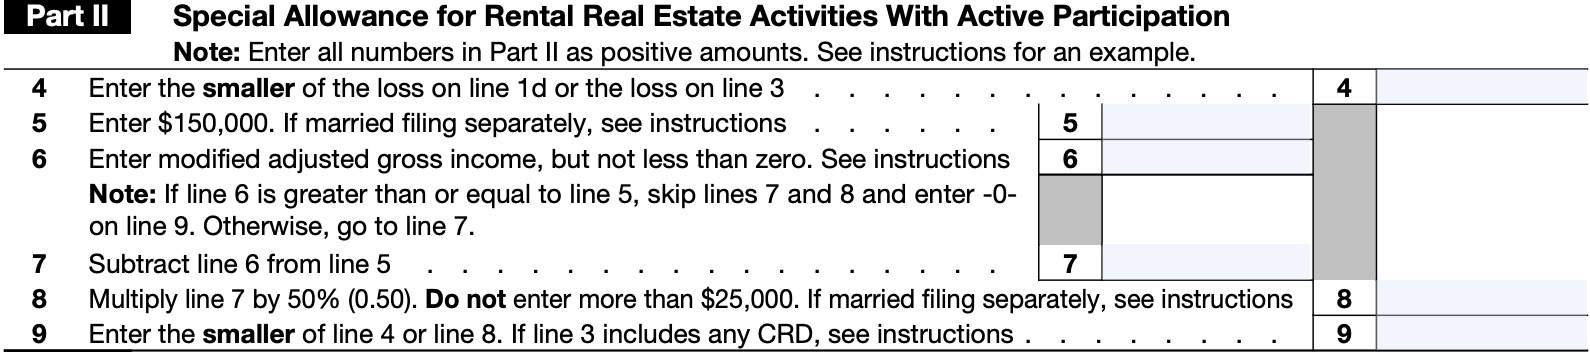 Part II: Special allowance for rental real estate activities with active participation